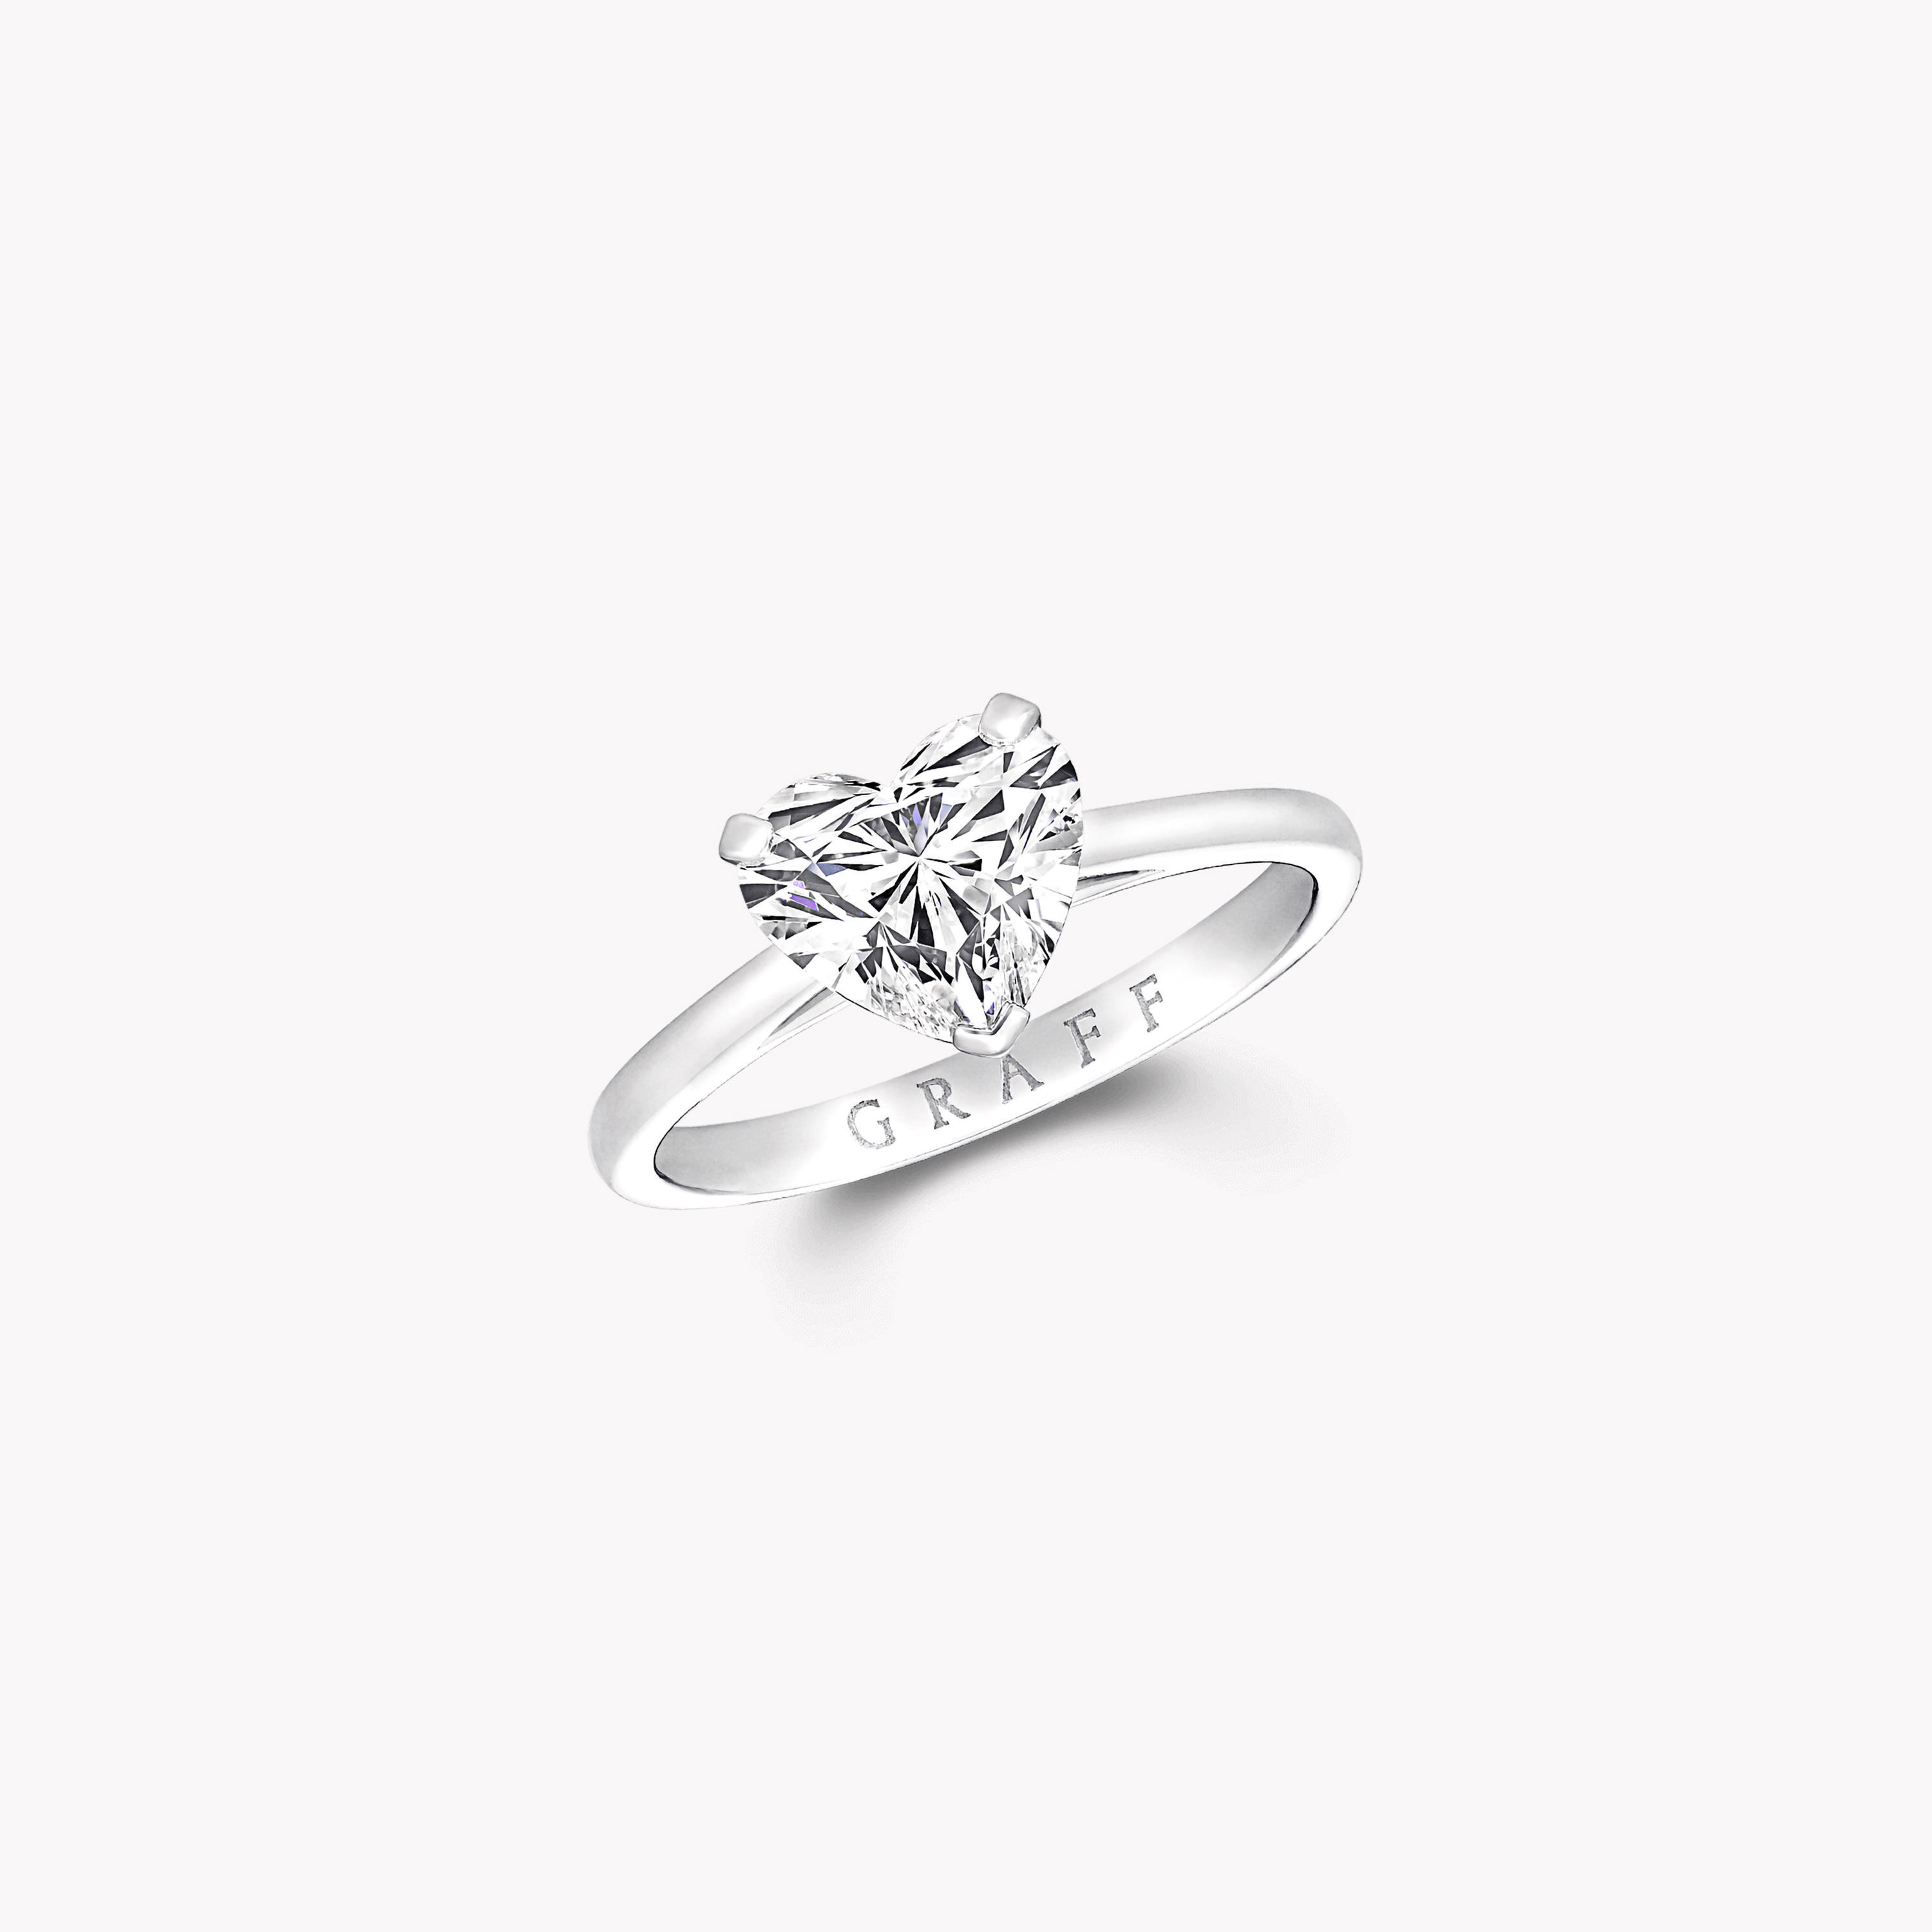 Vintage Heart Shaped Promise Ring for Women - Darry Ring